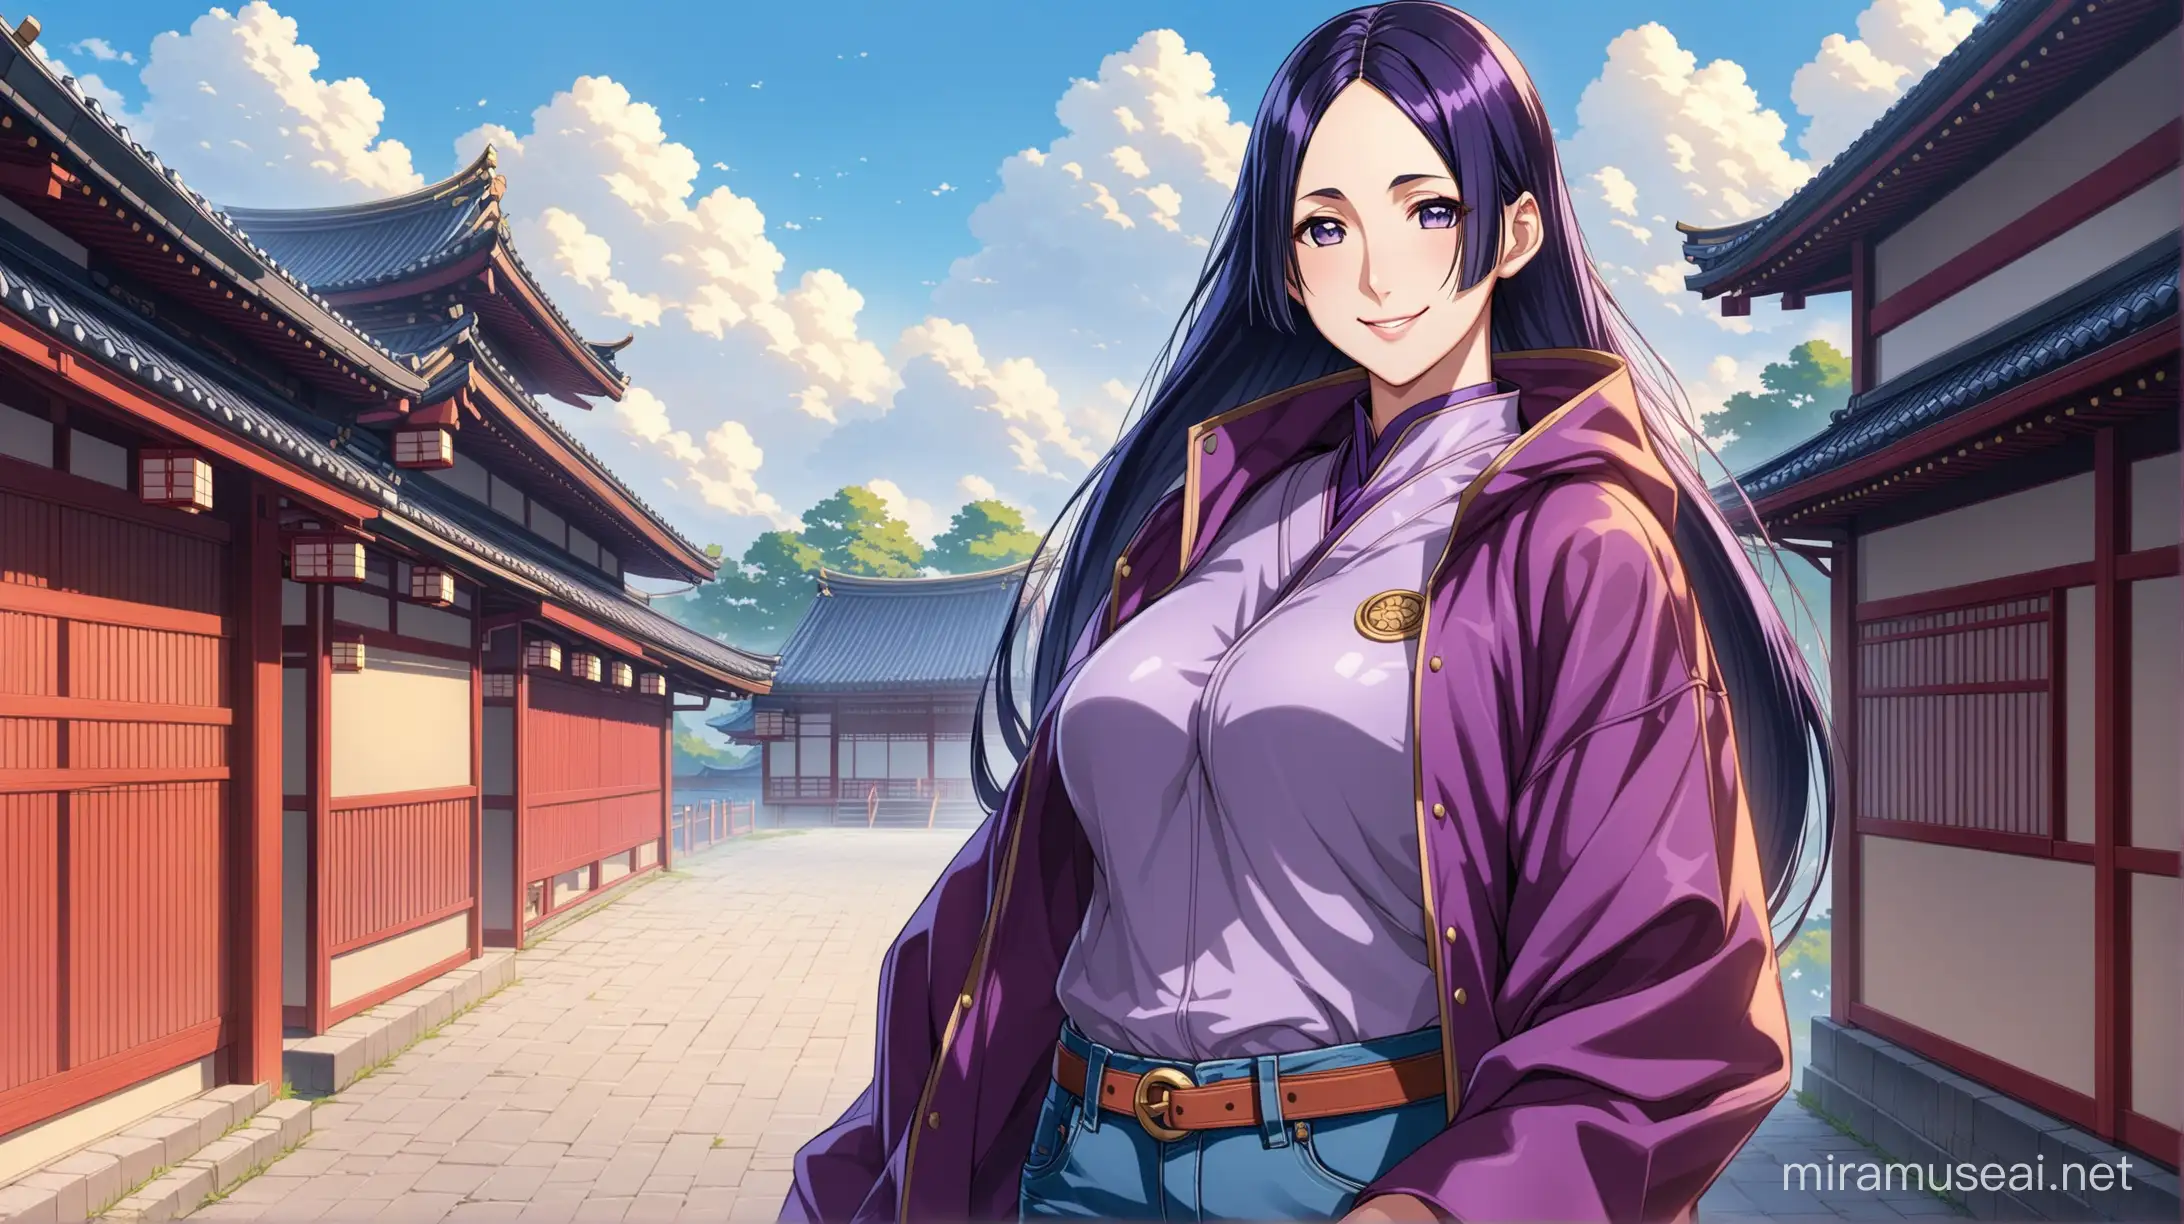 Draw the character Minamoto no Raikou with long hair standing outside on a cloudy day smiling at the viewer and wearing a jacket and jeans